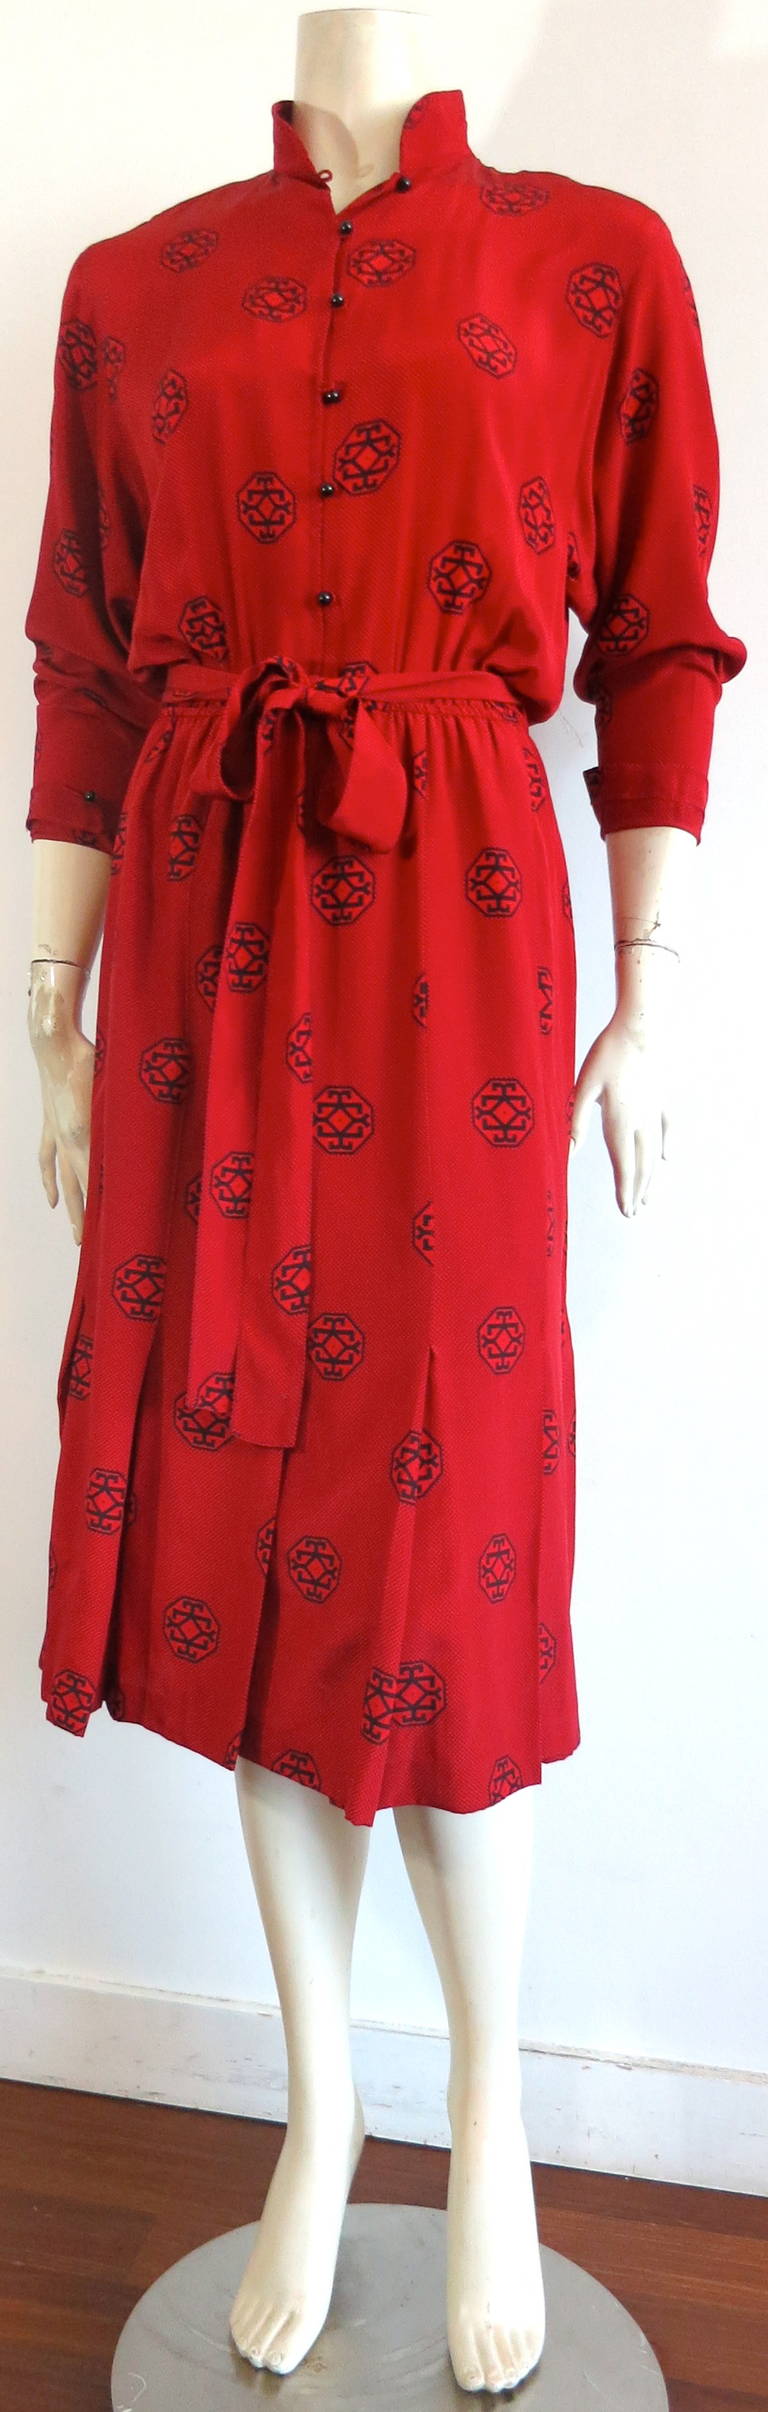 1970s GUY LAROCHE Red silk day dress.

The dress is in excellent condition, and features a mandarin collar style with black ball button closures at center-front and cuffs.

Stitched down pleated construction at bottom skirt hem.

Matching